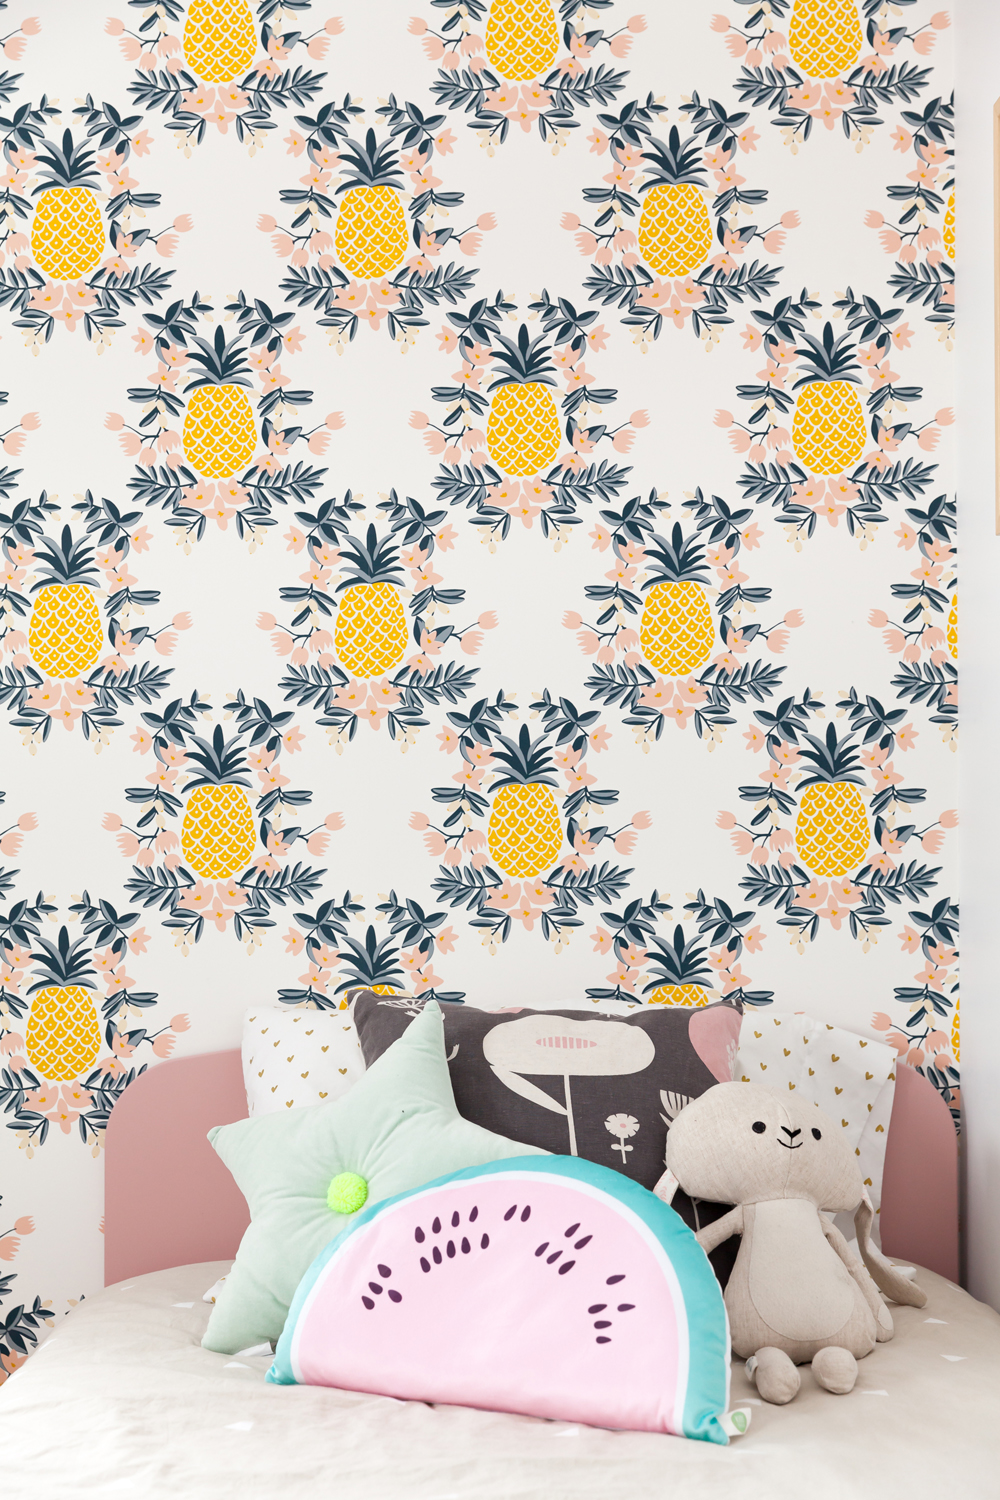 pinapple wallpaper, and fun cushions on kids twin bed